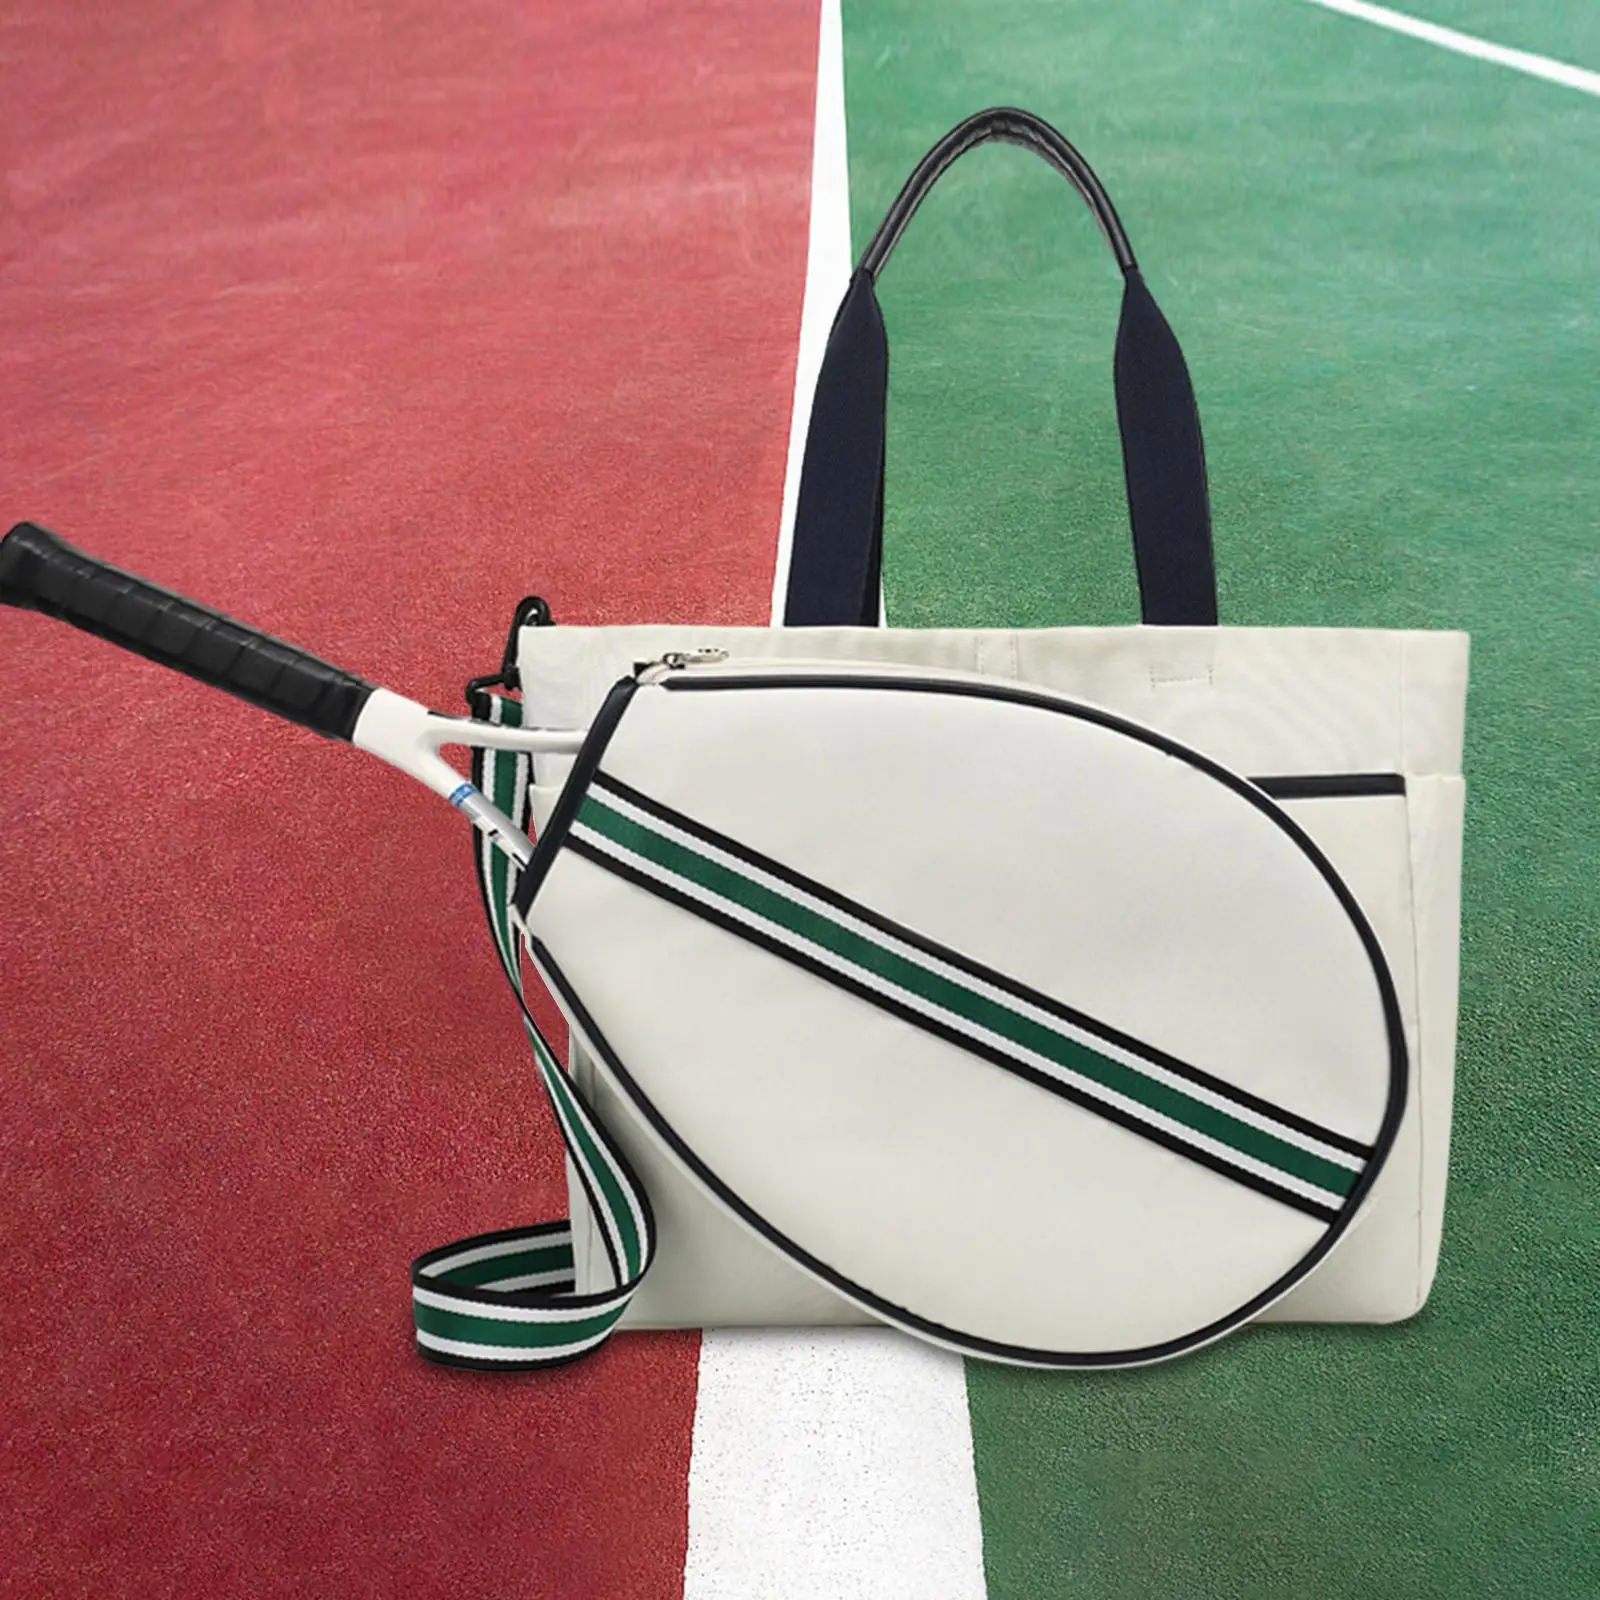 Tennis Tote Removable Adjustable Strap Racquet Carrying Bag for Women Men Duffle Bag Water Resistant Fitness Sport Racket Bag